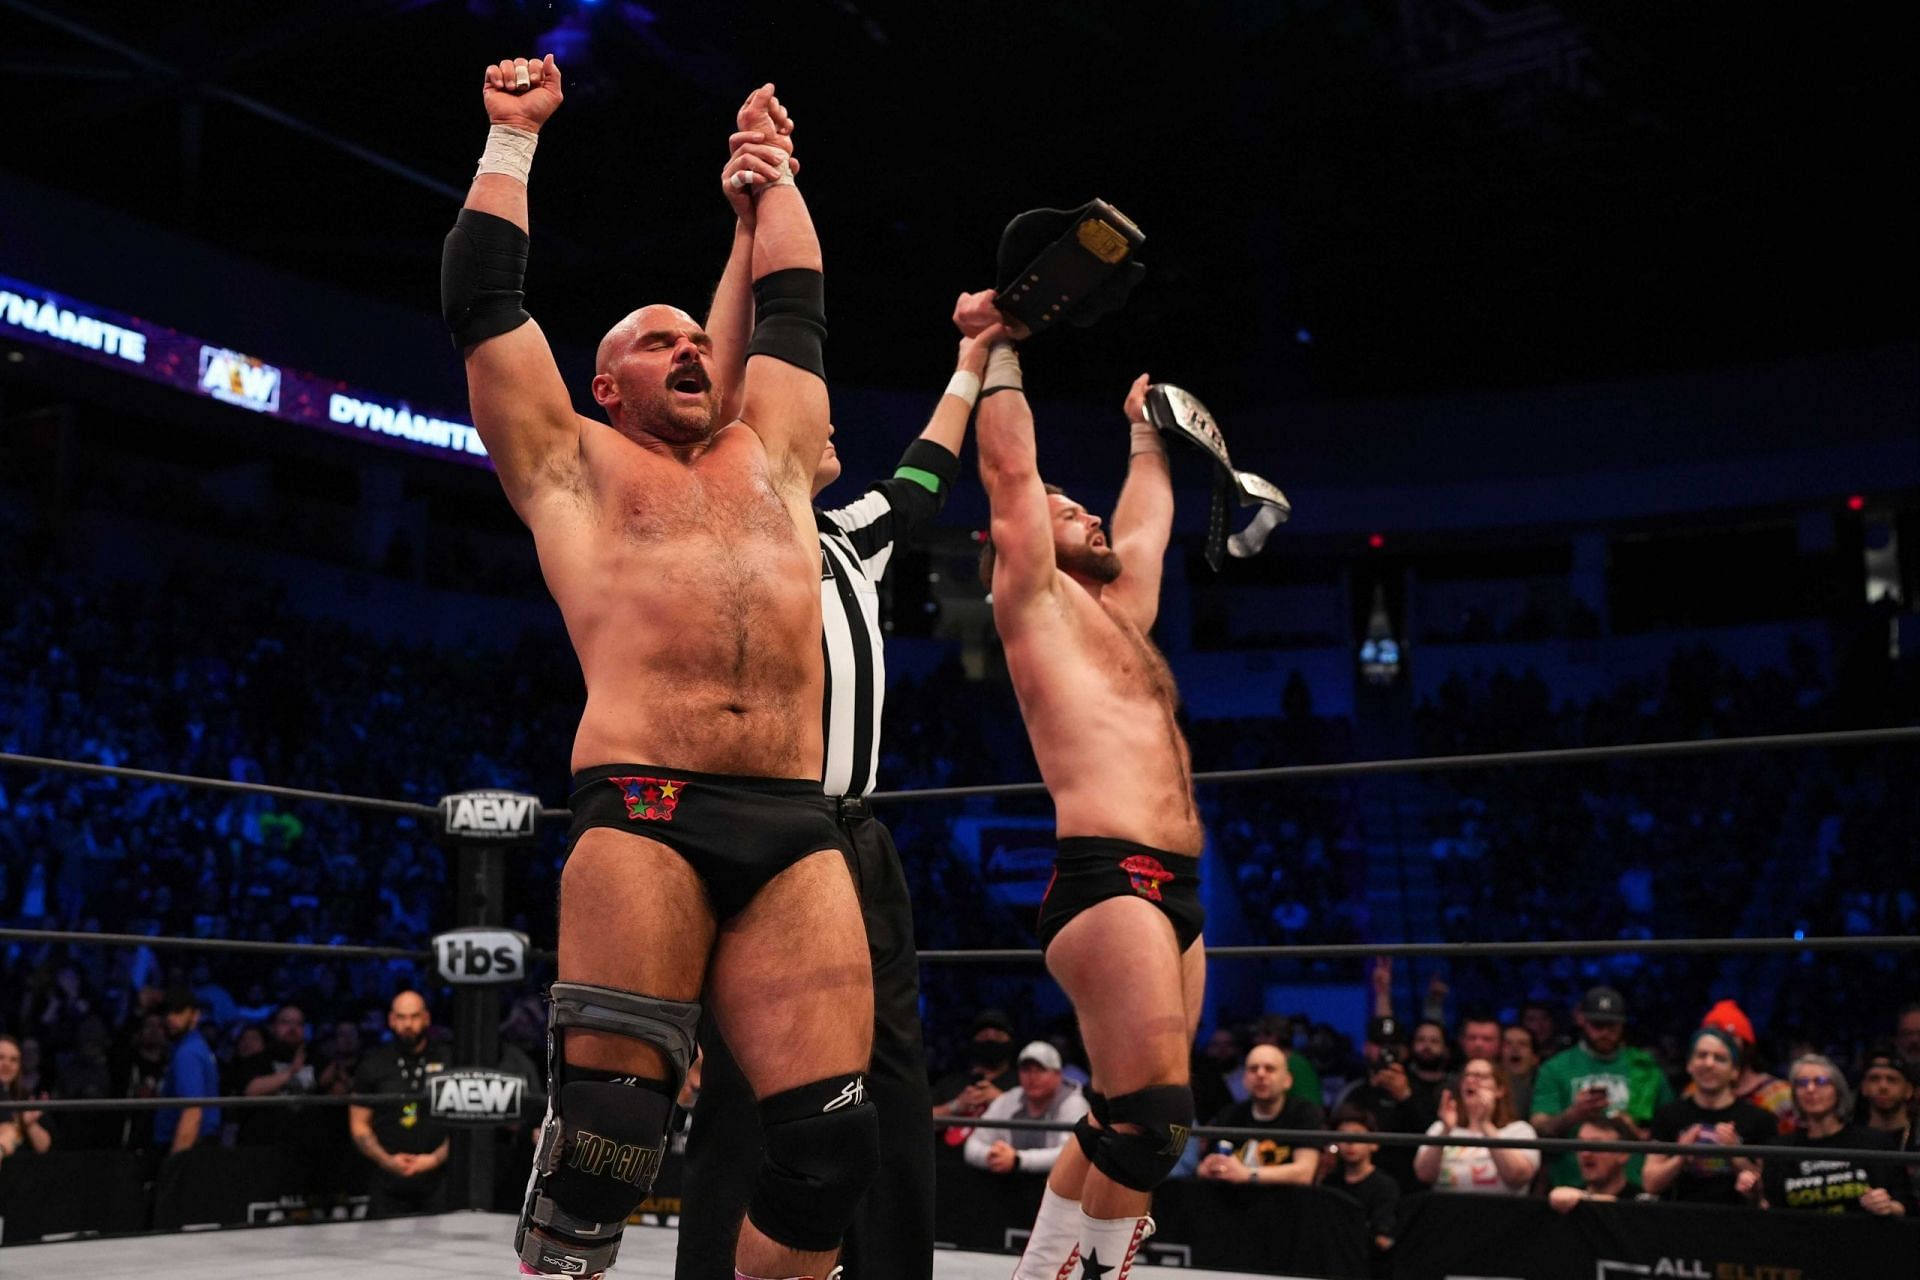 FTR are a dominant force in AEW